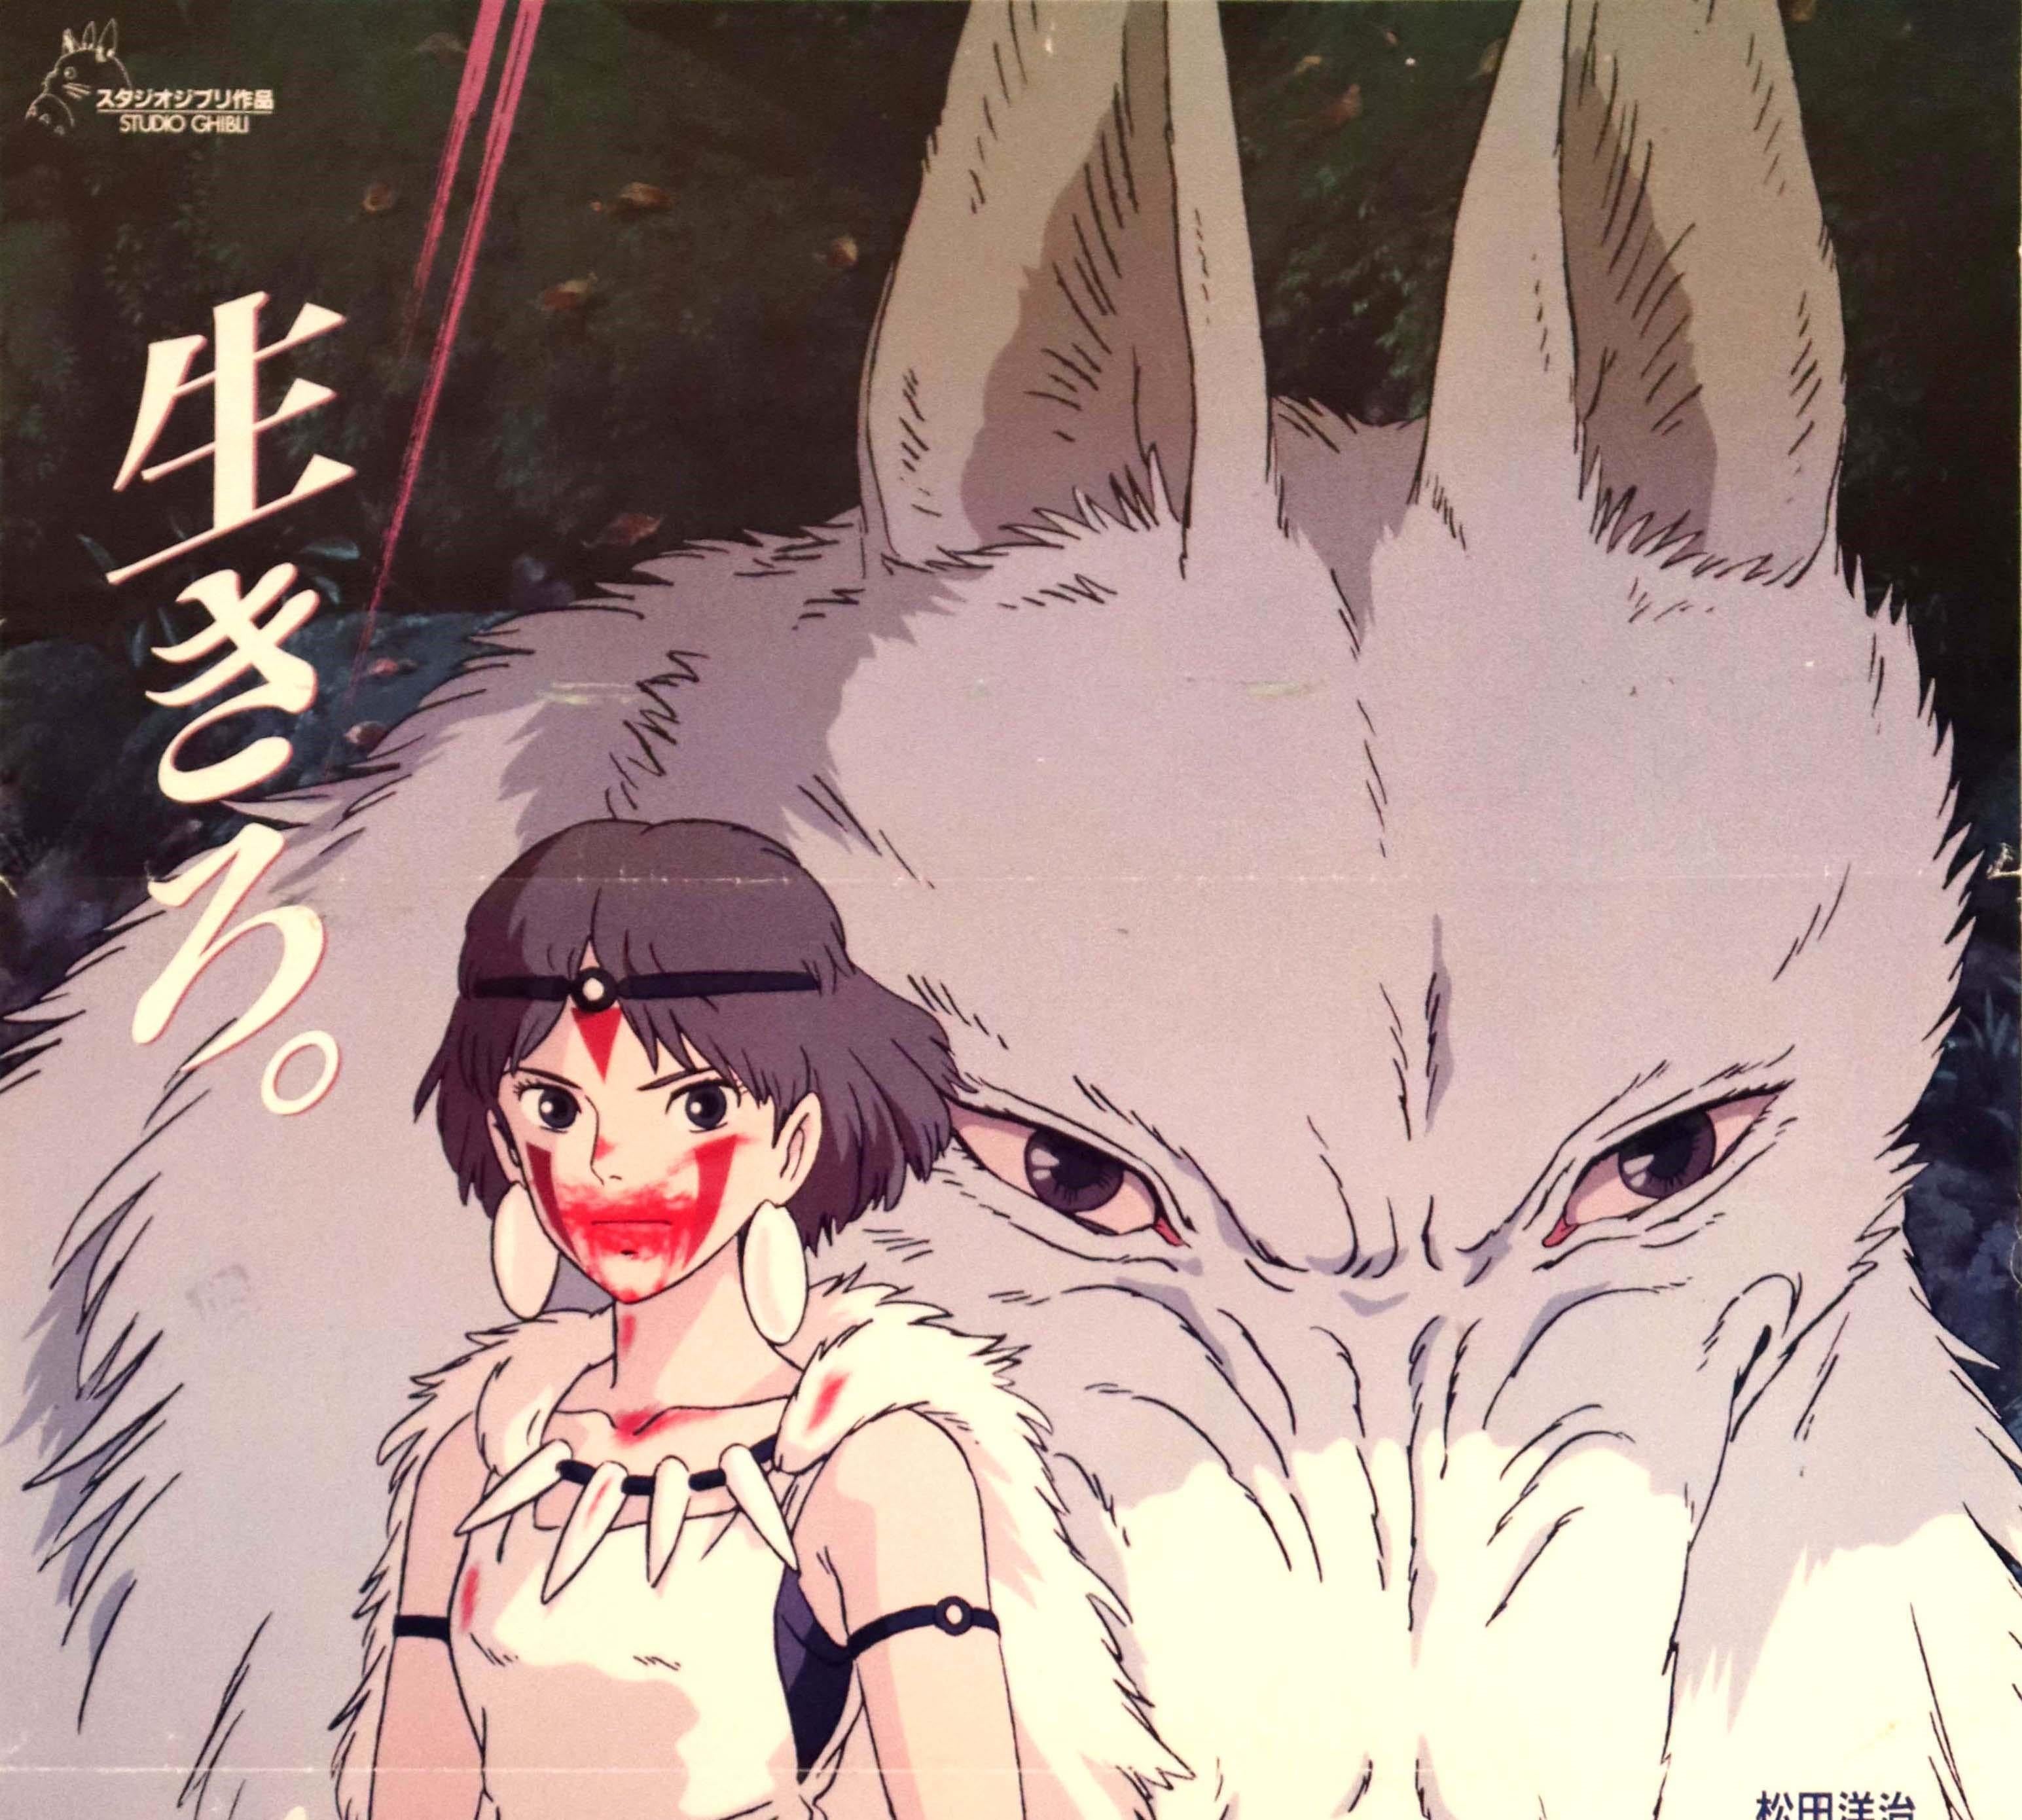 Original vintage manga cinema poster for the animated Japanese sci-fi fantasy adventure film Princess Mononoke / Mononoke-hime written and directed by Hayao Miyazaki with Studio Ghibli animation featuring a cartoon illustration of a young girl with